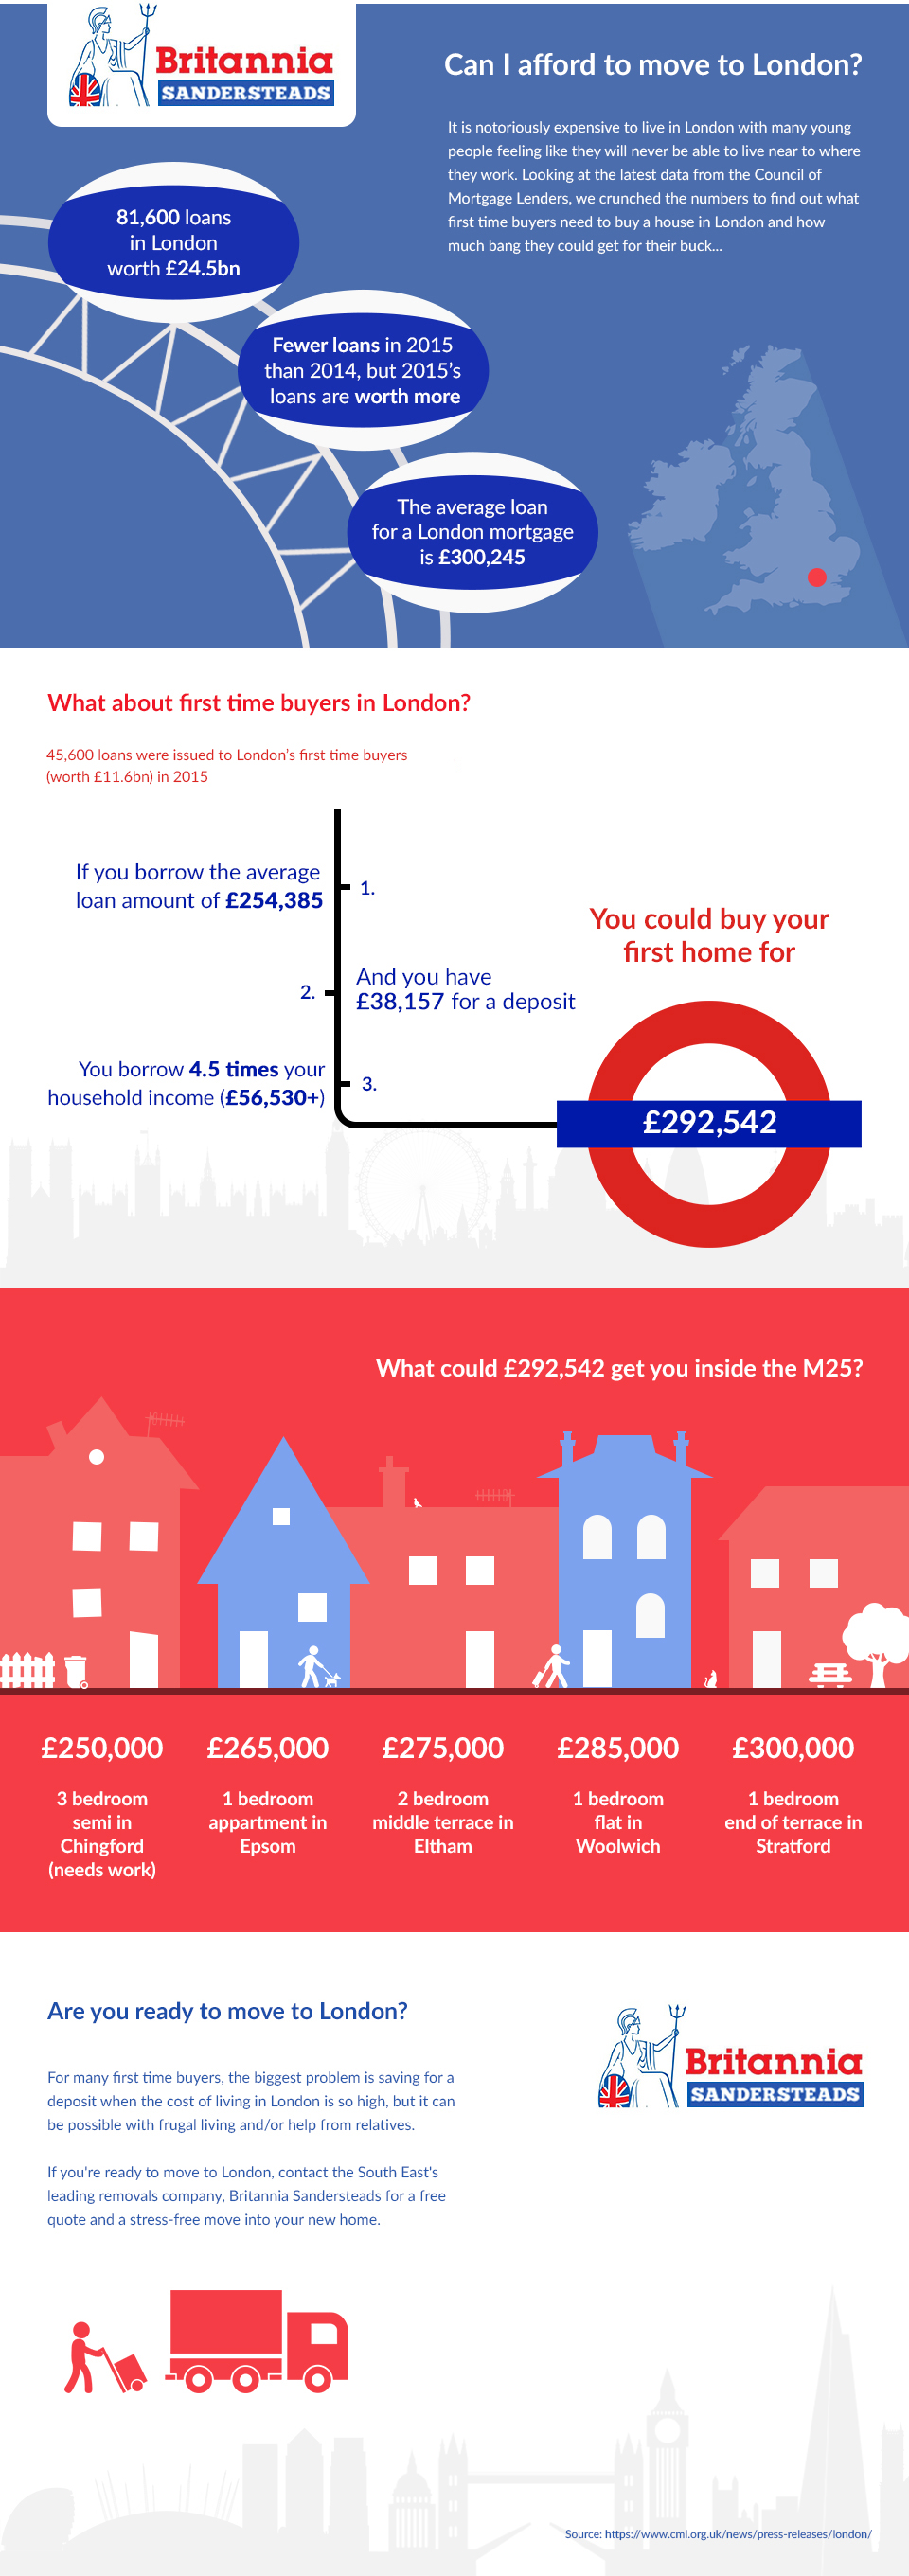 Can You Afford to Buy a Home in London? infographic